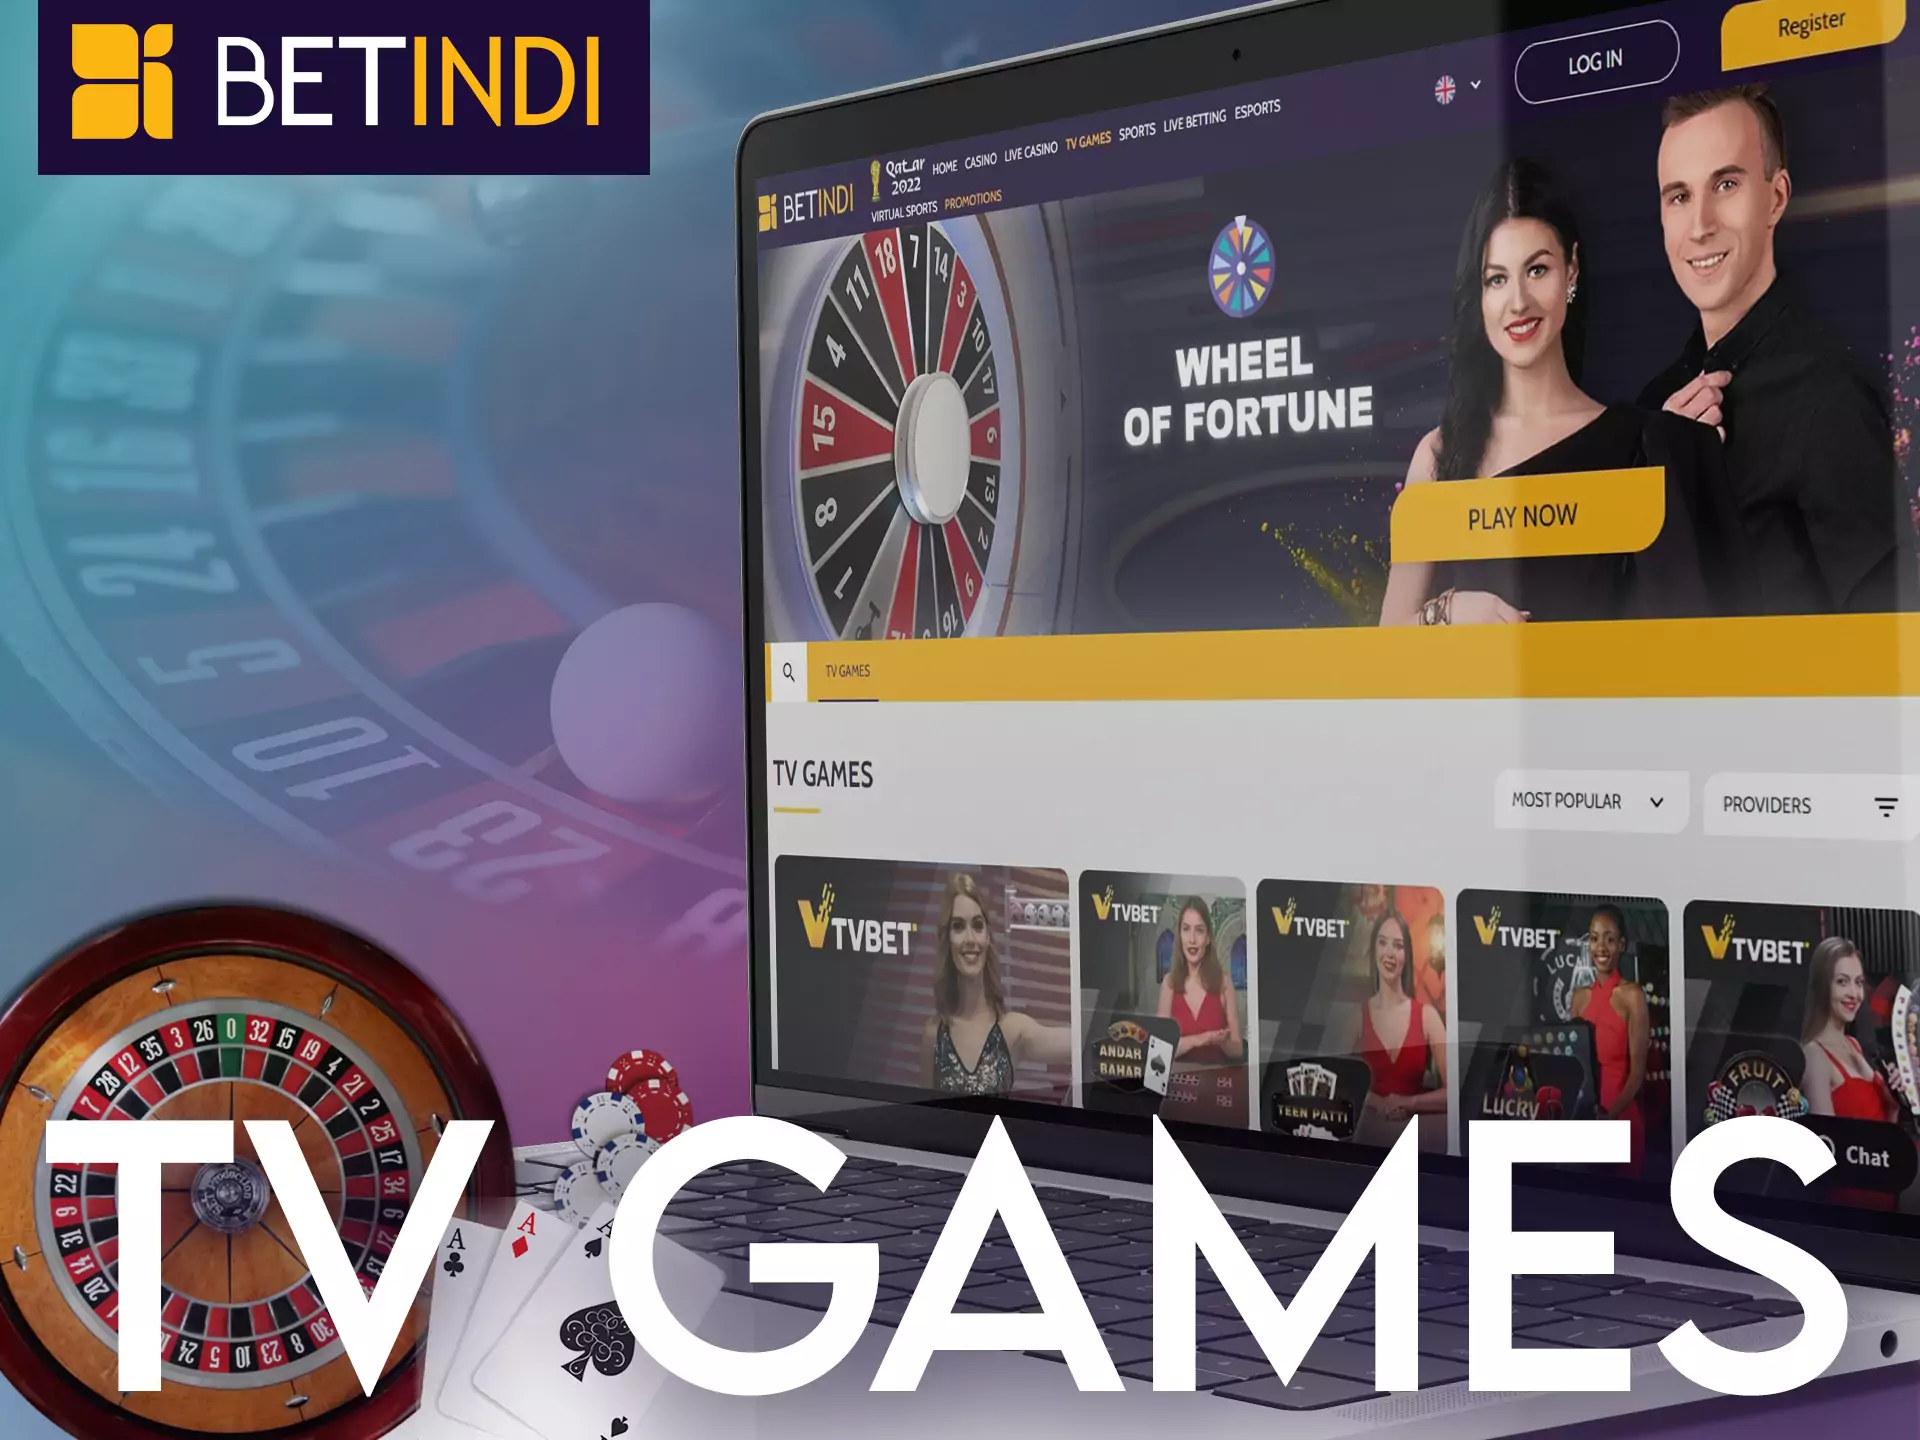 With Betindi, join TV casino games.